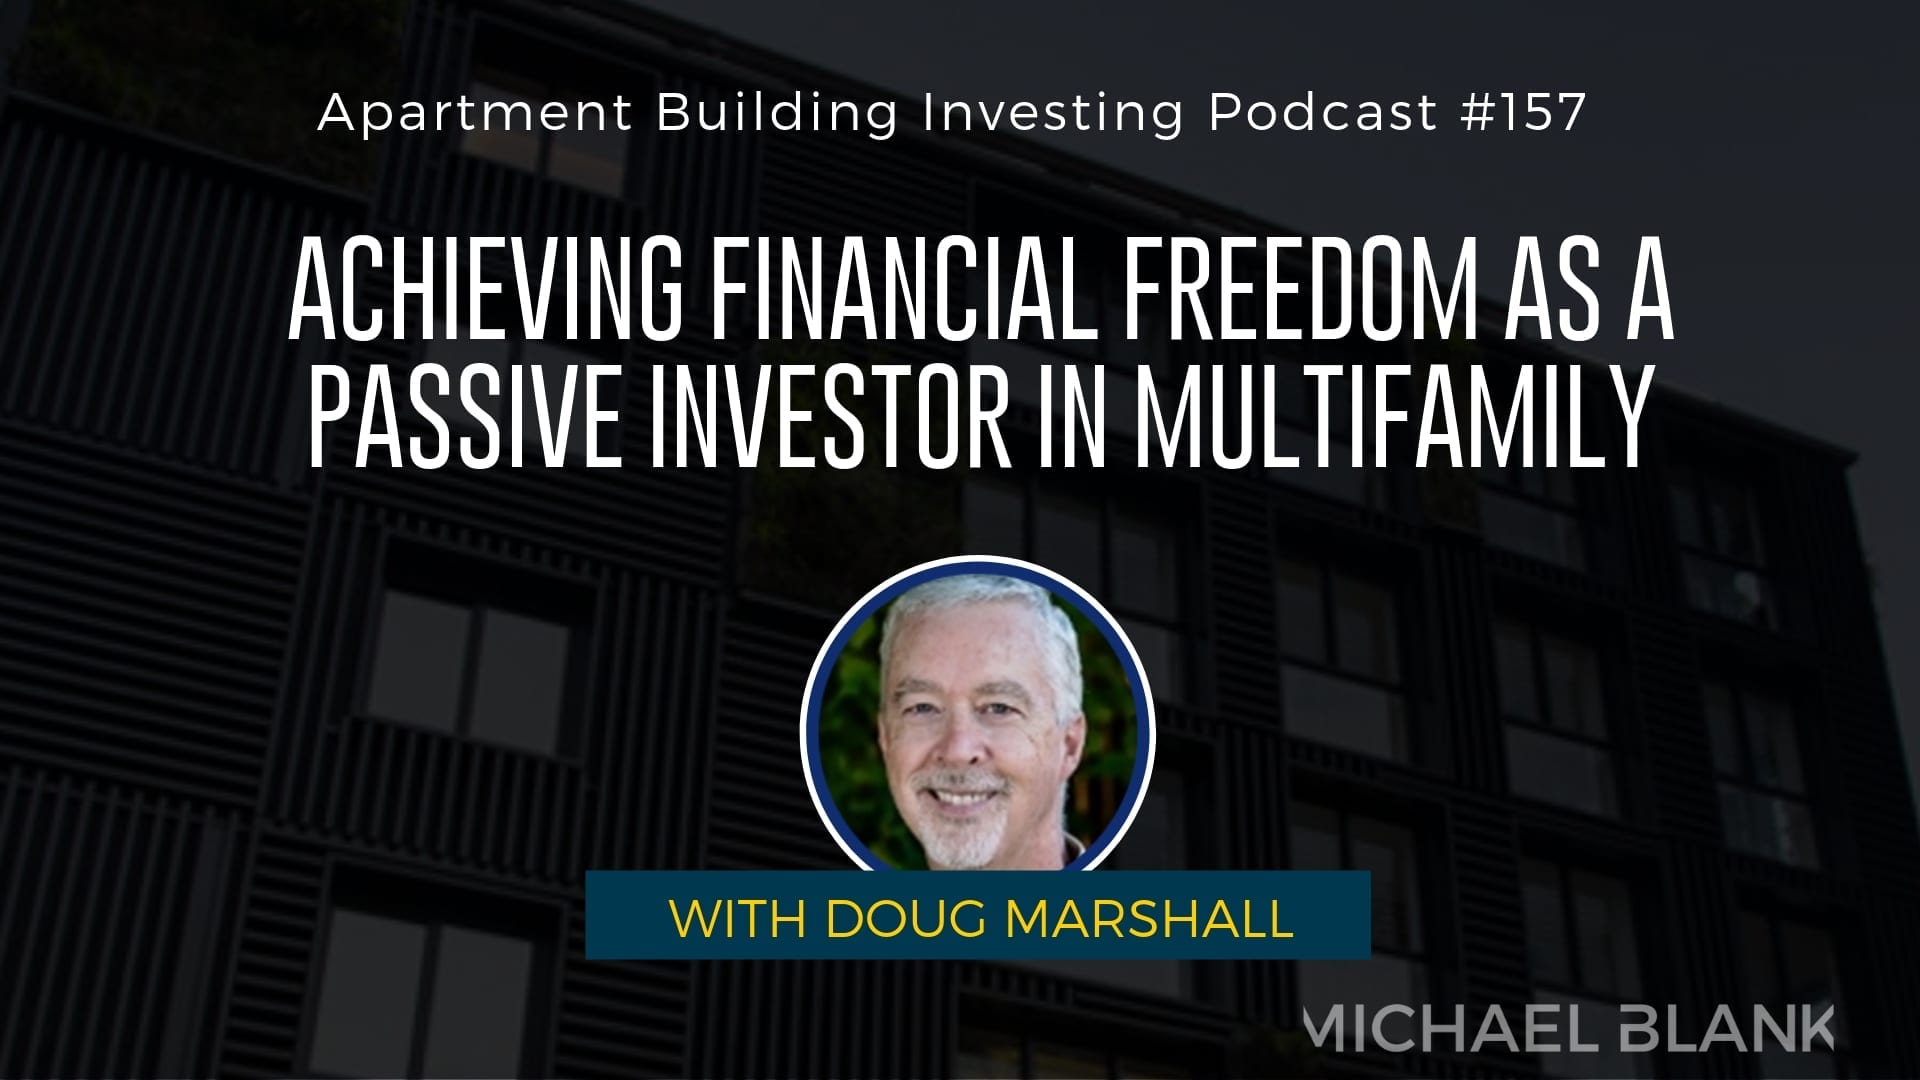 MB 157: Achieving Financial Freedom as a Passive Investor in Multifamily – With Doug Marshall